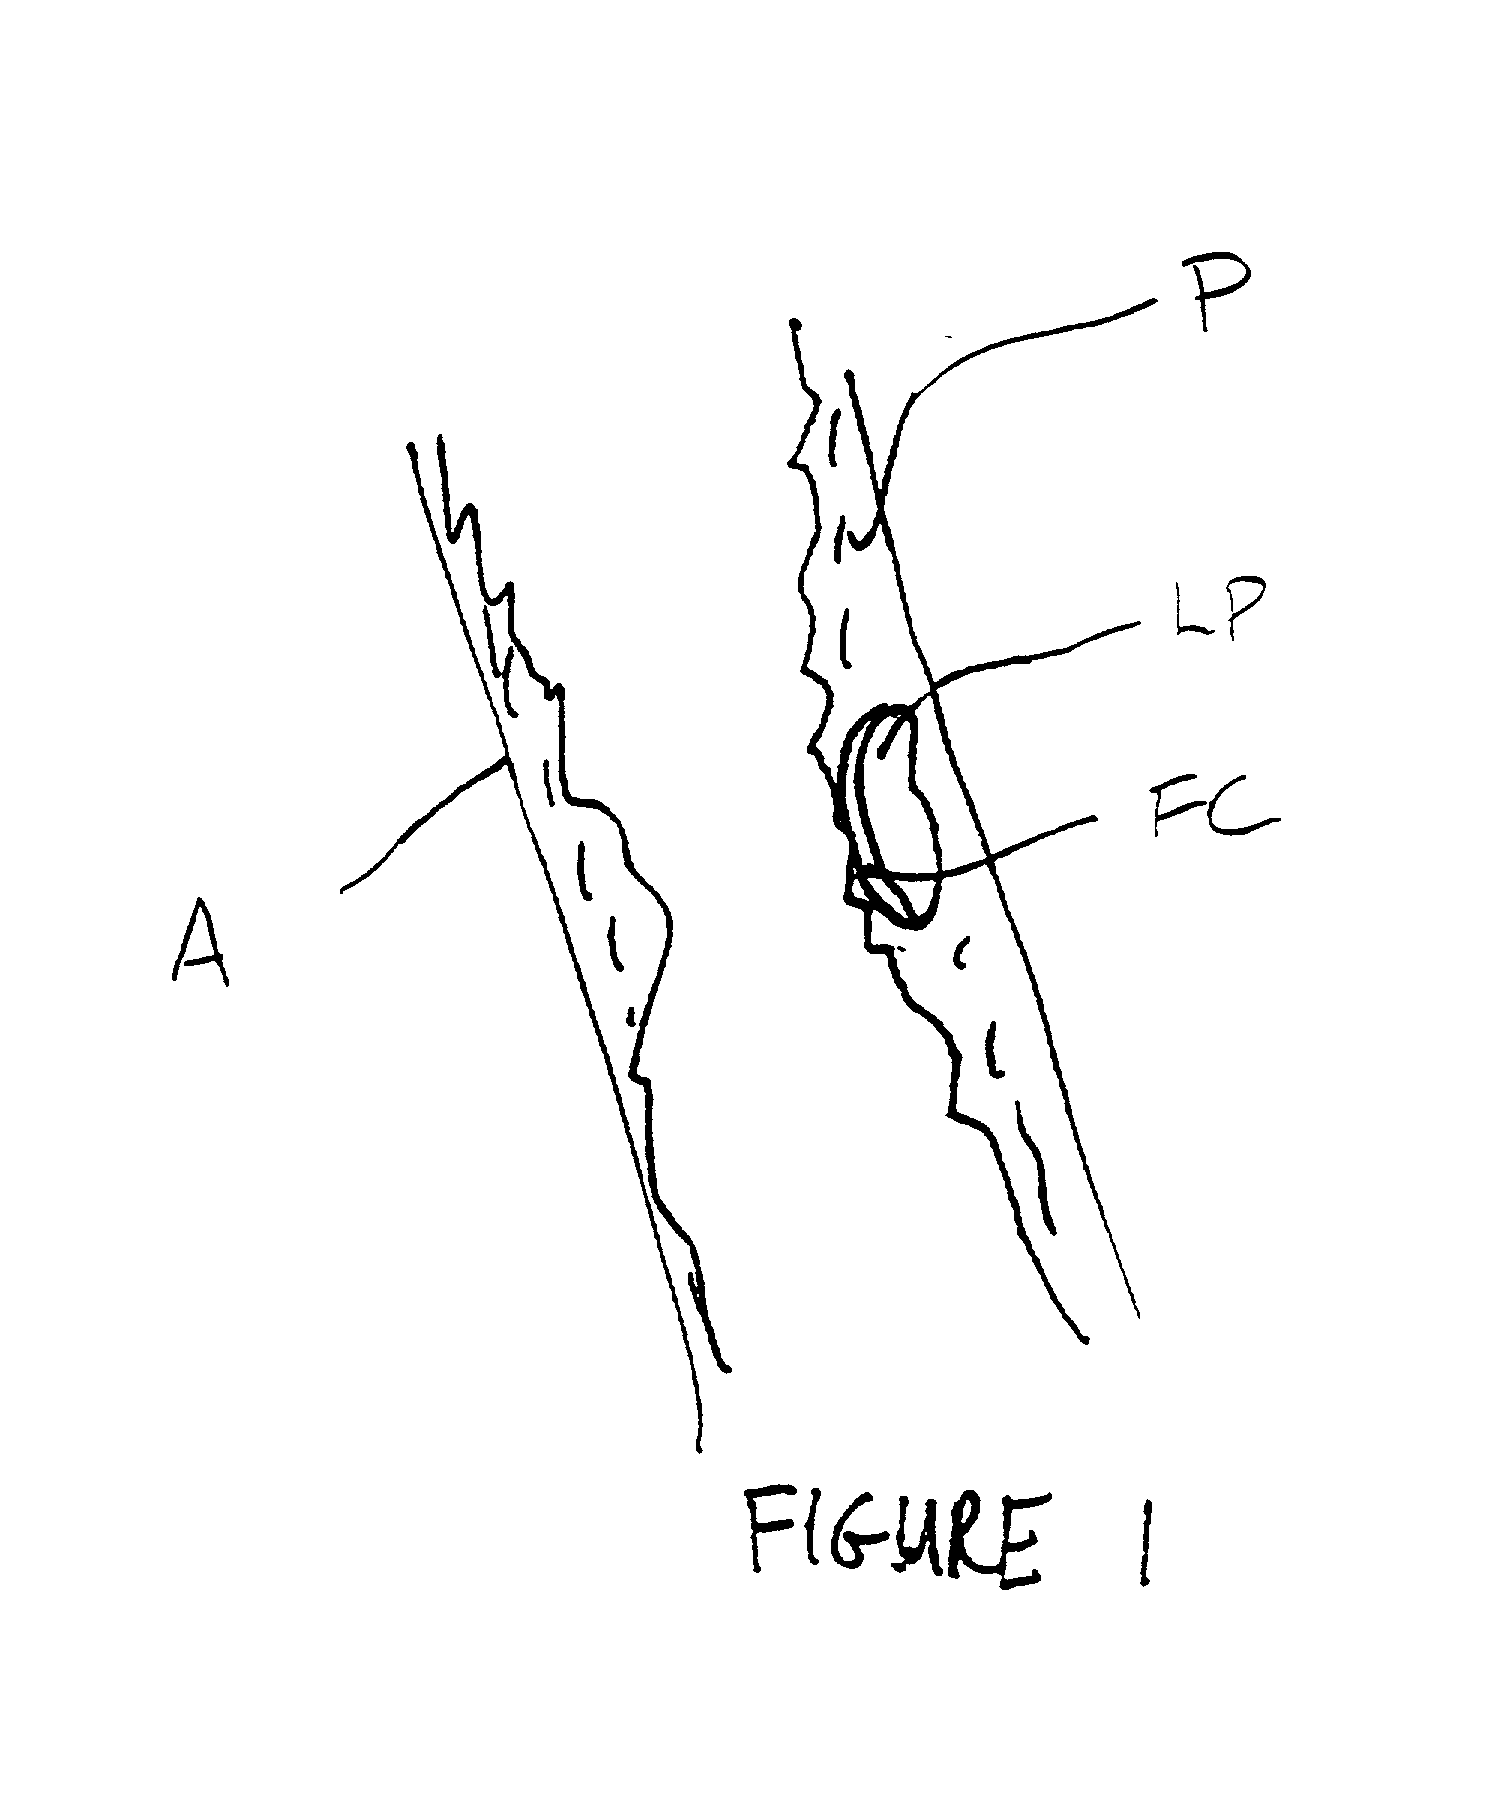 Methods, systems, and kits for plaque stabilization